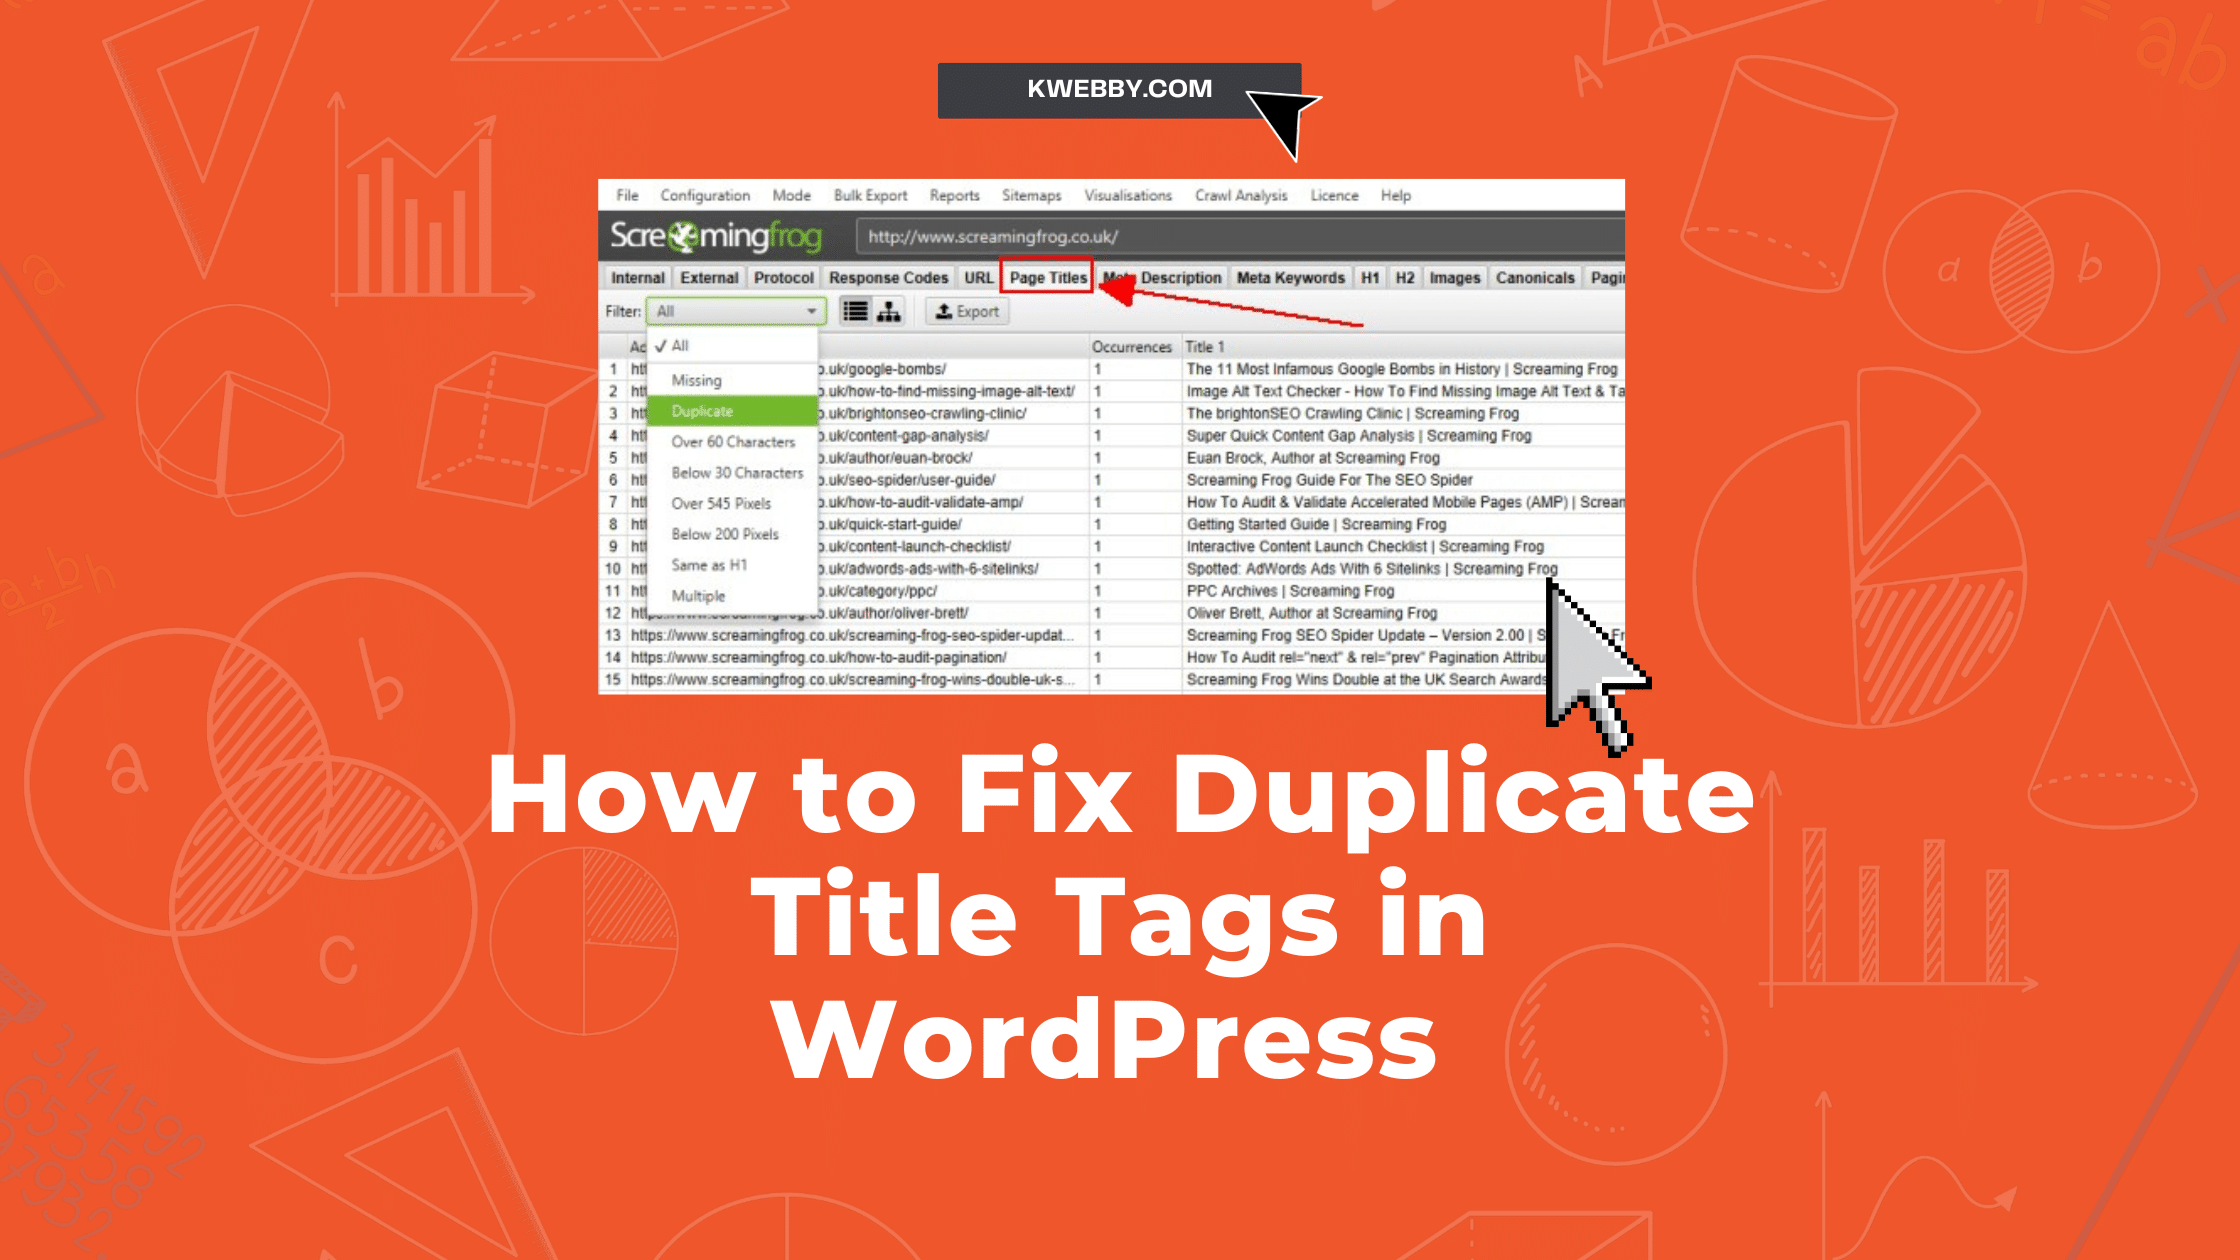 How to Fix Duplicate Title Tags in WordPress website